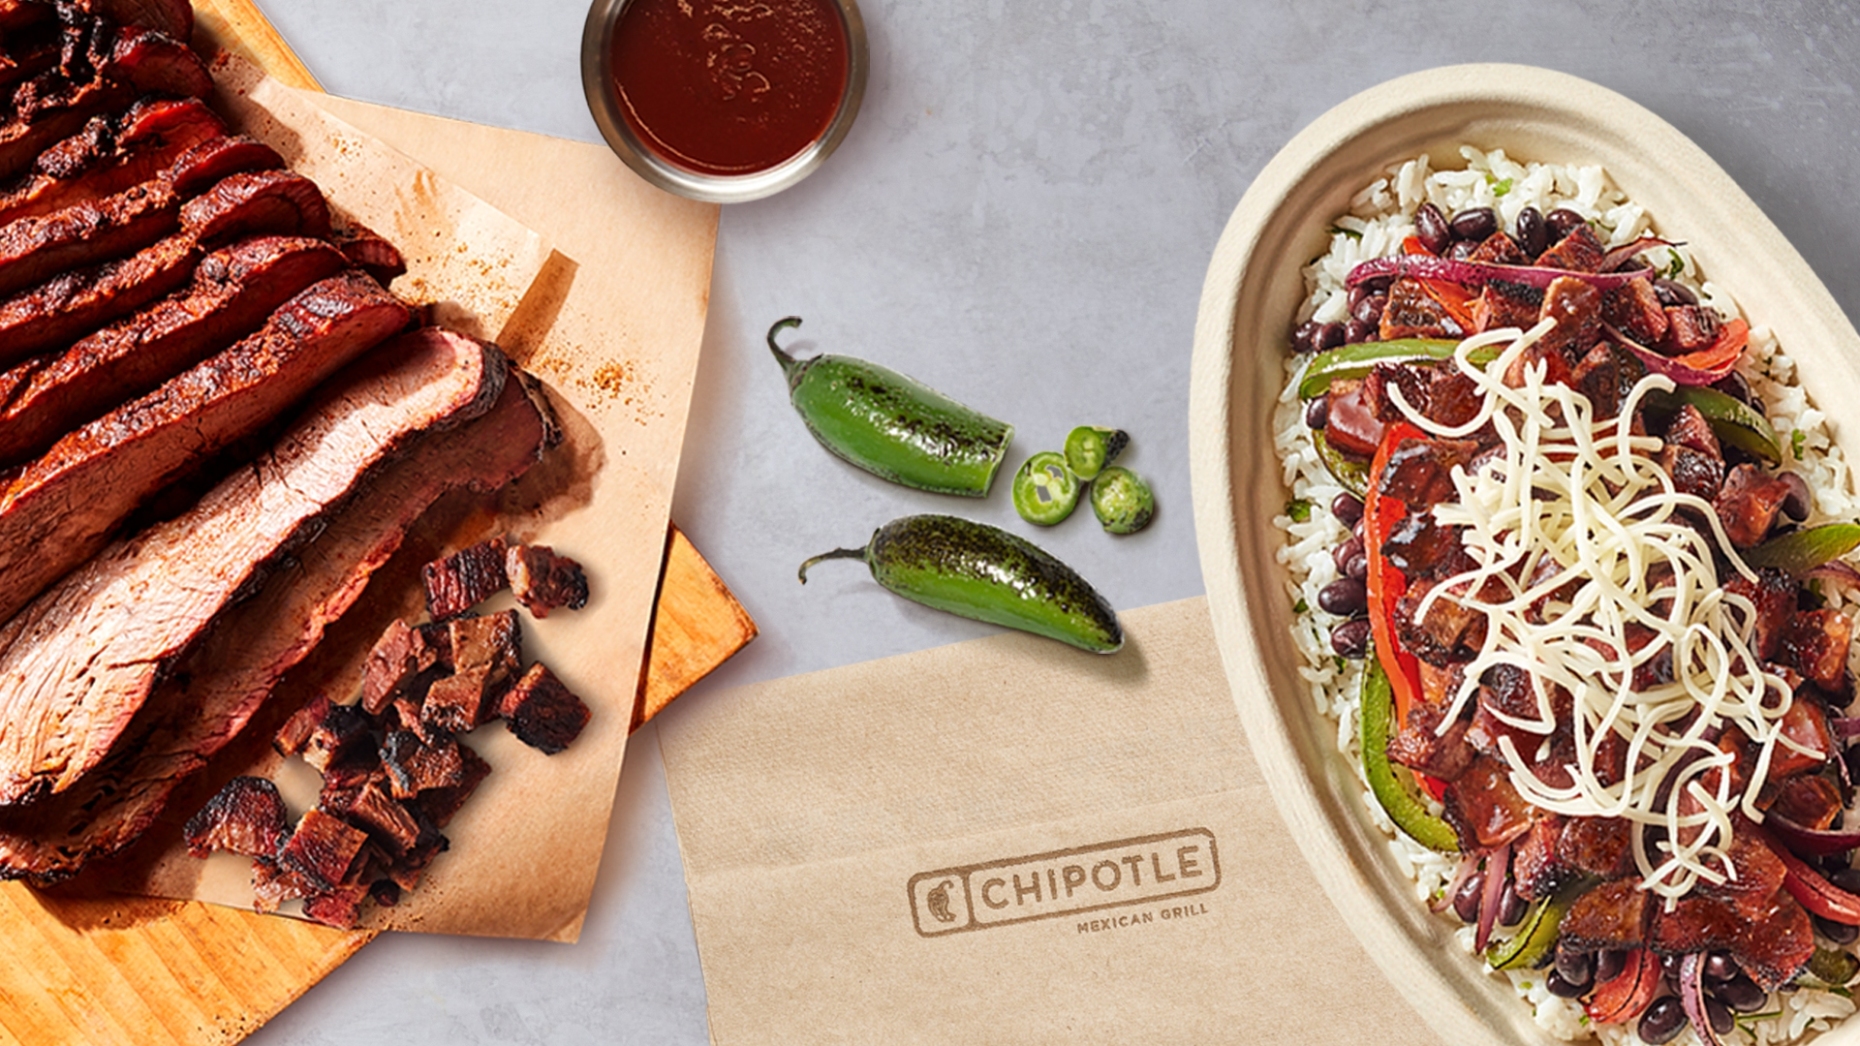 Chipotle will add a new kind of meat to its menu